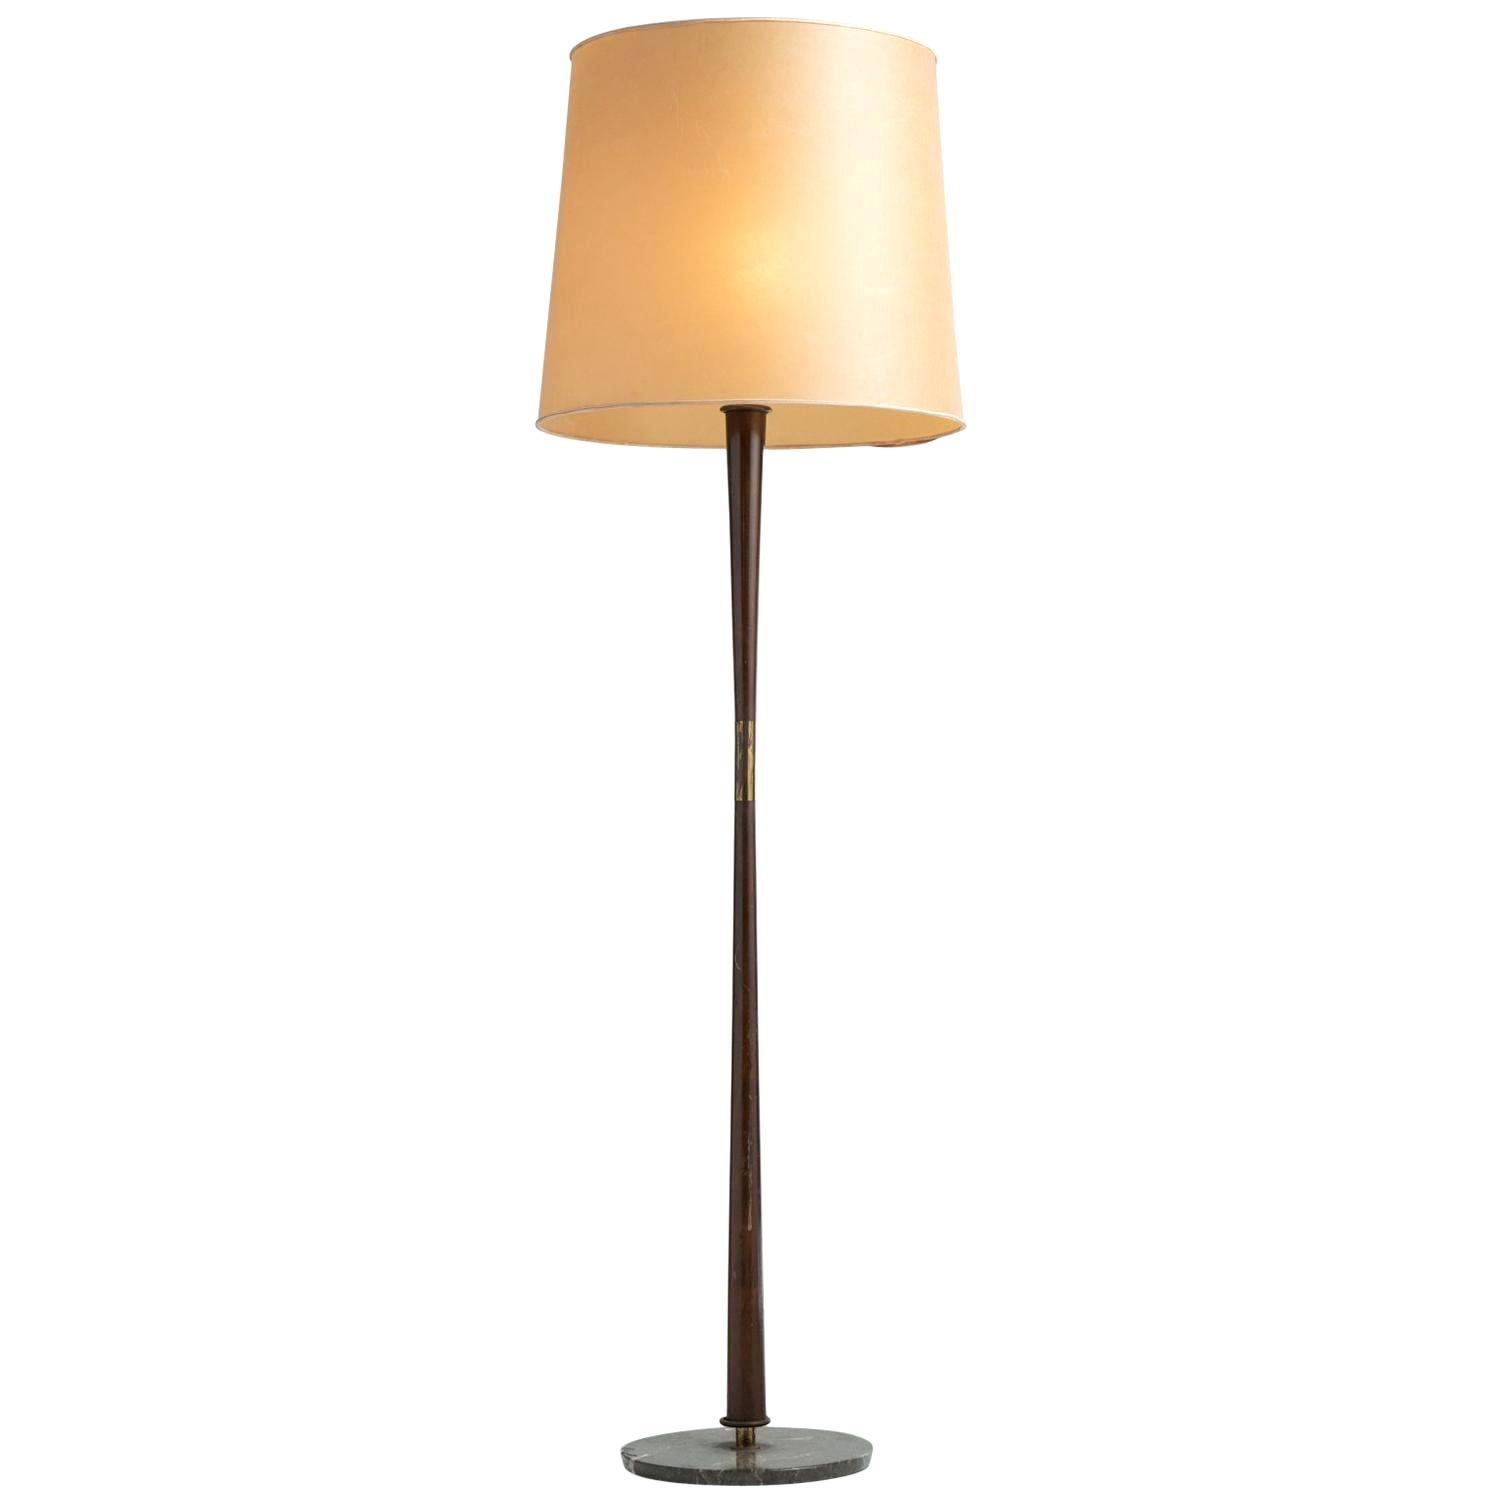 Wooden Floor Lamps Thebharatnewsco pertaining to sizing 1502 X 1502